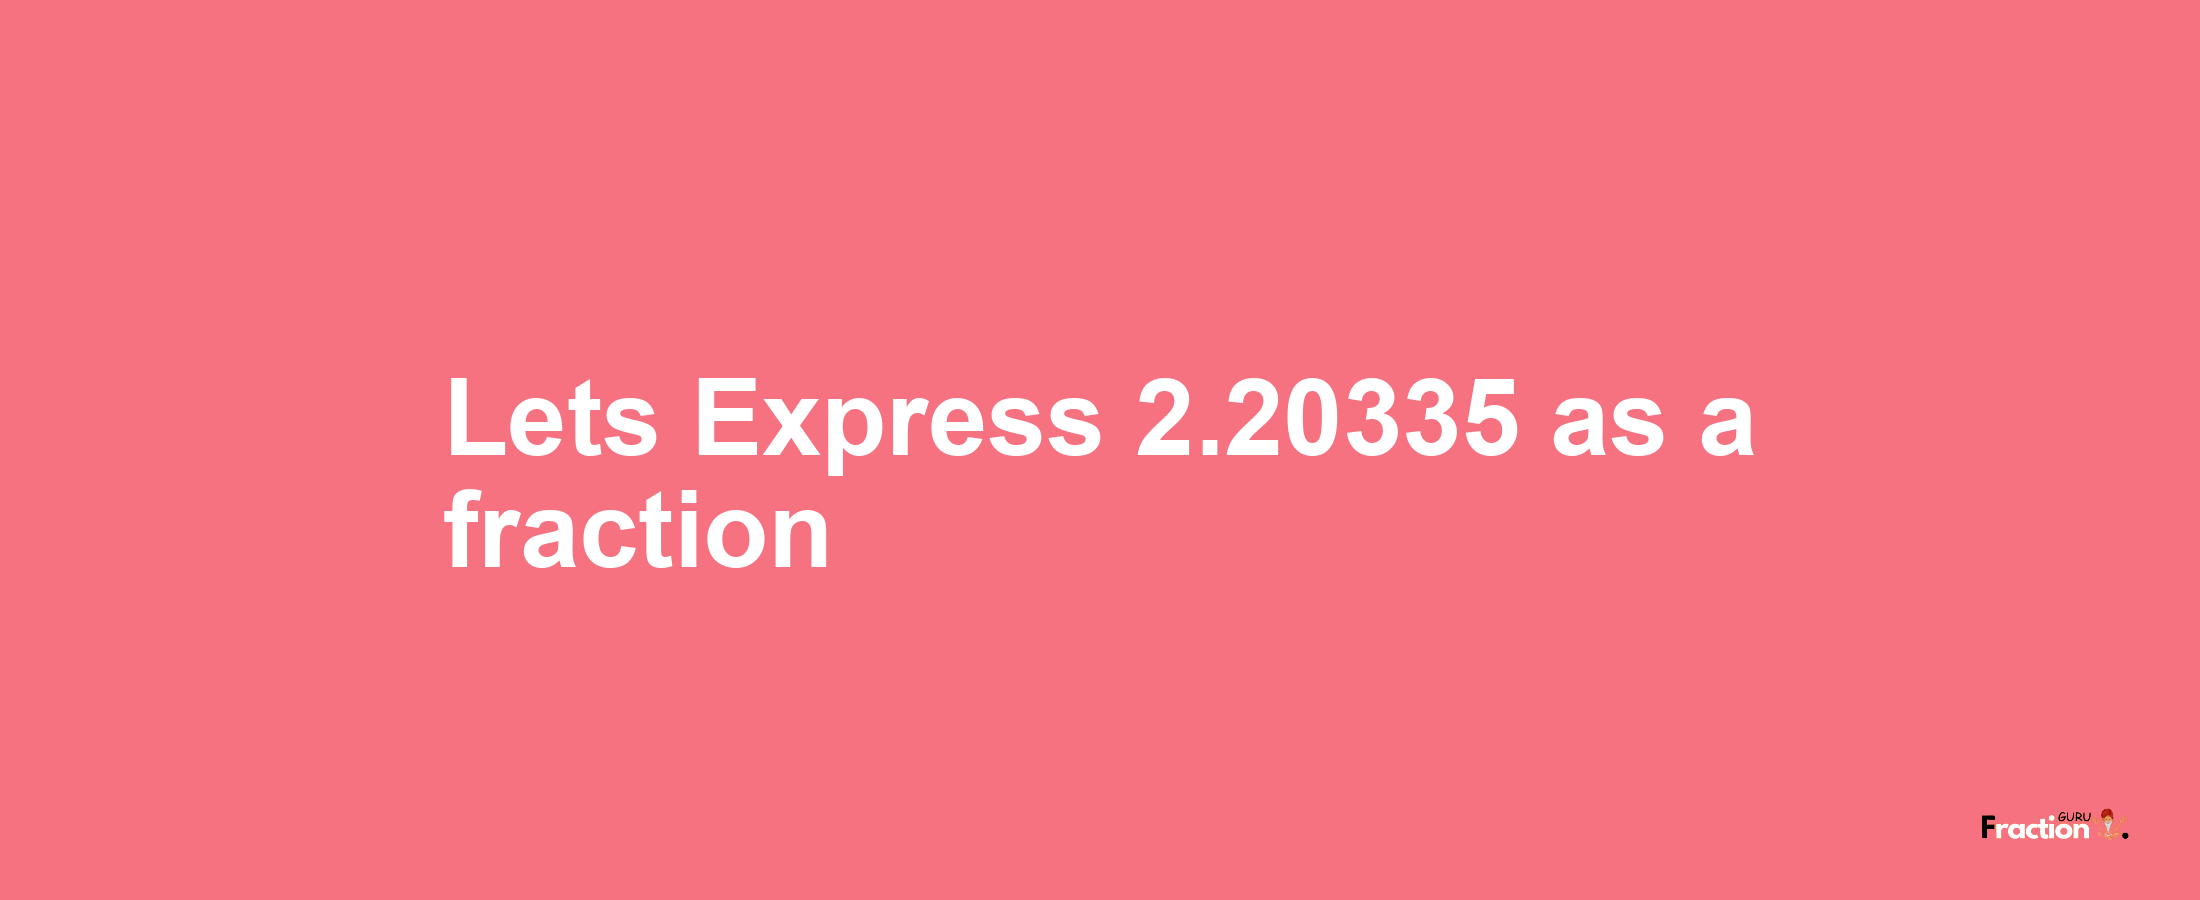 Lets Express 2.20335 as afraction